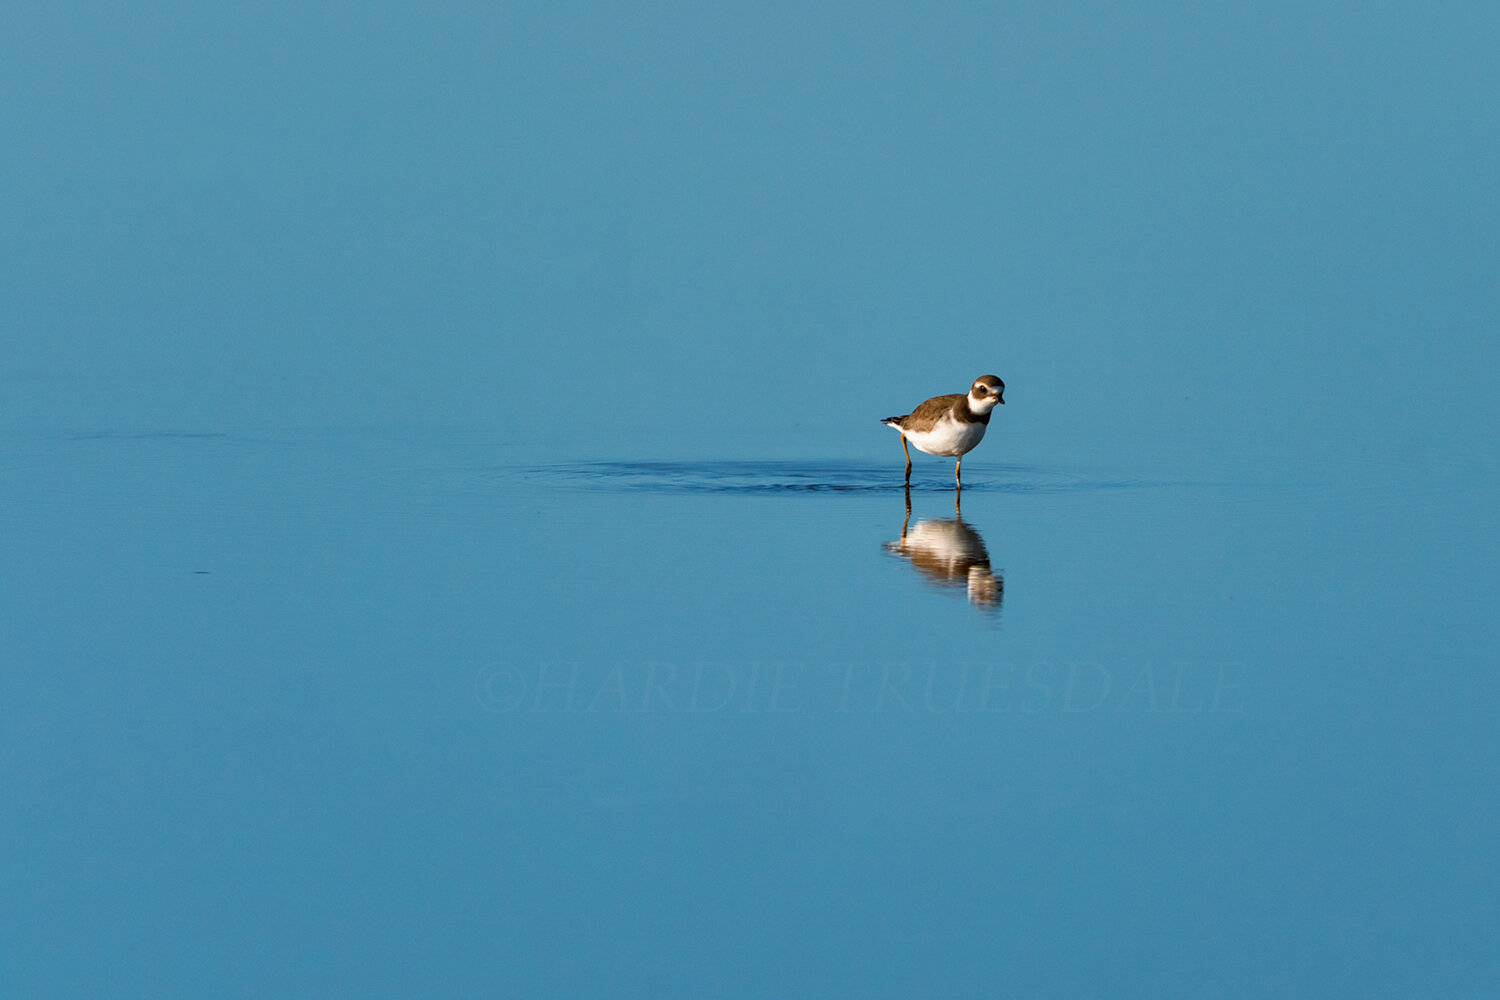 Brd#088 "Curious Semipalmated Plover"